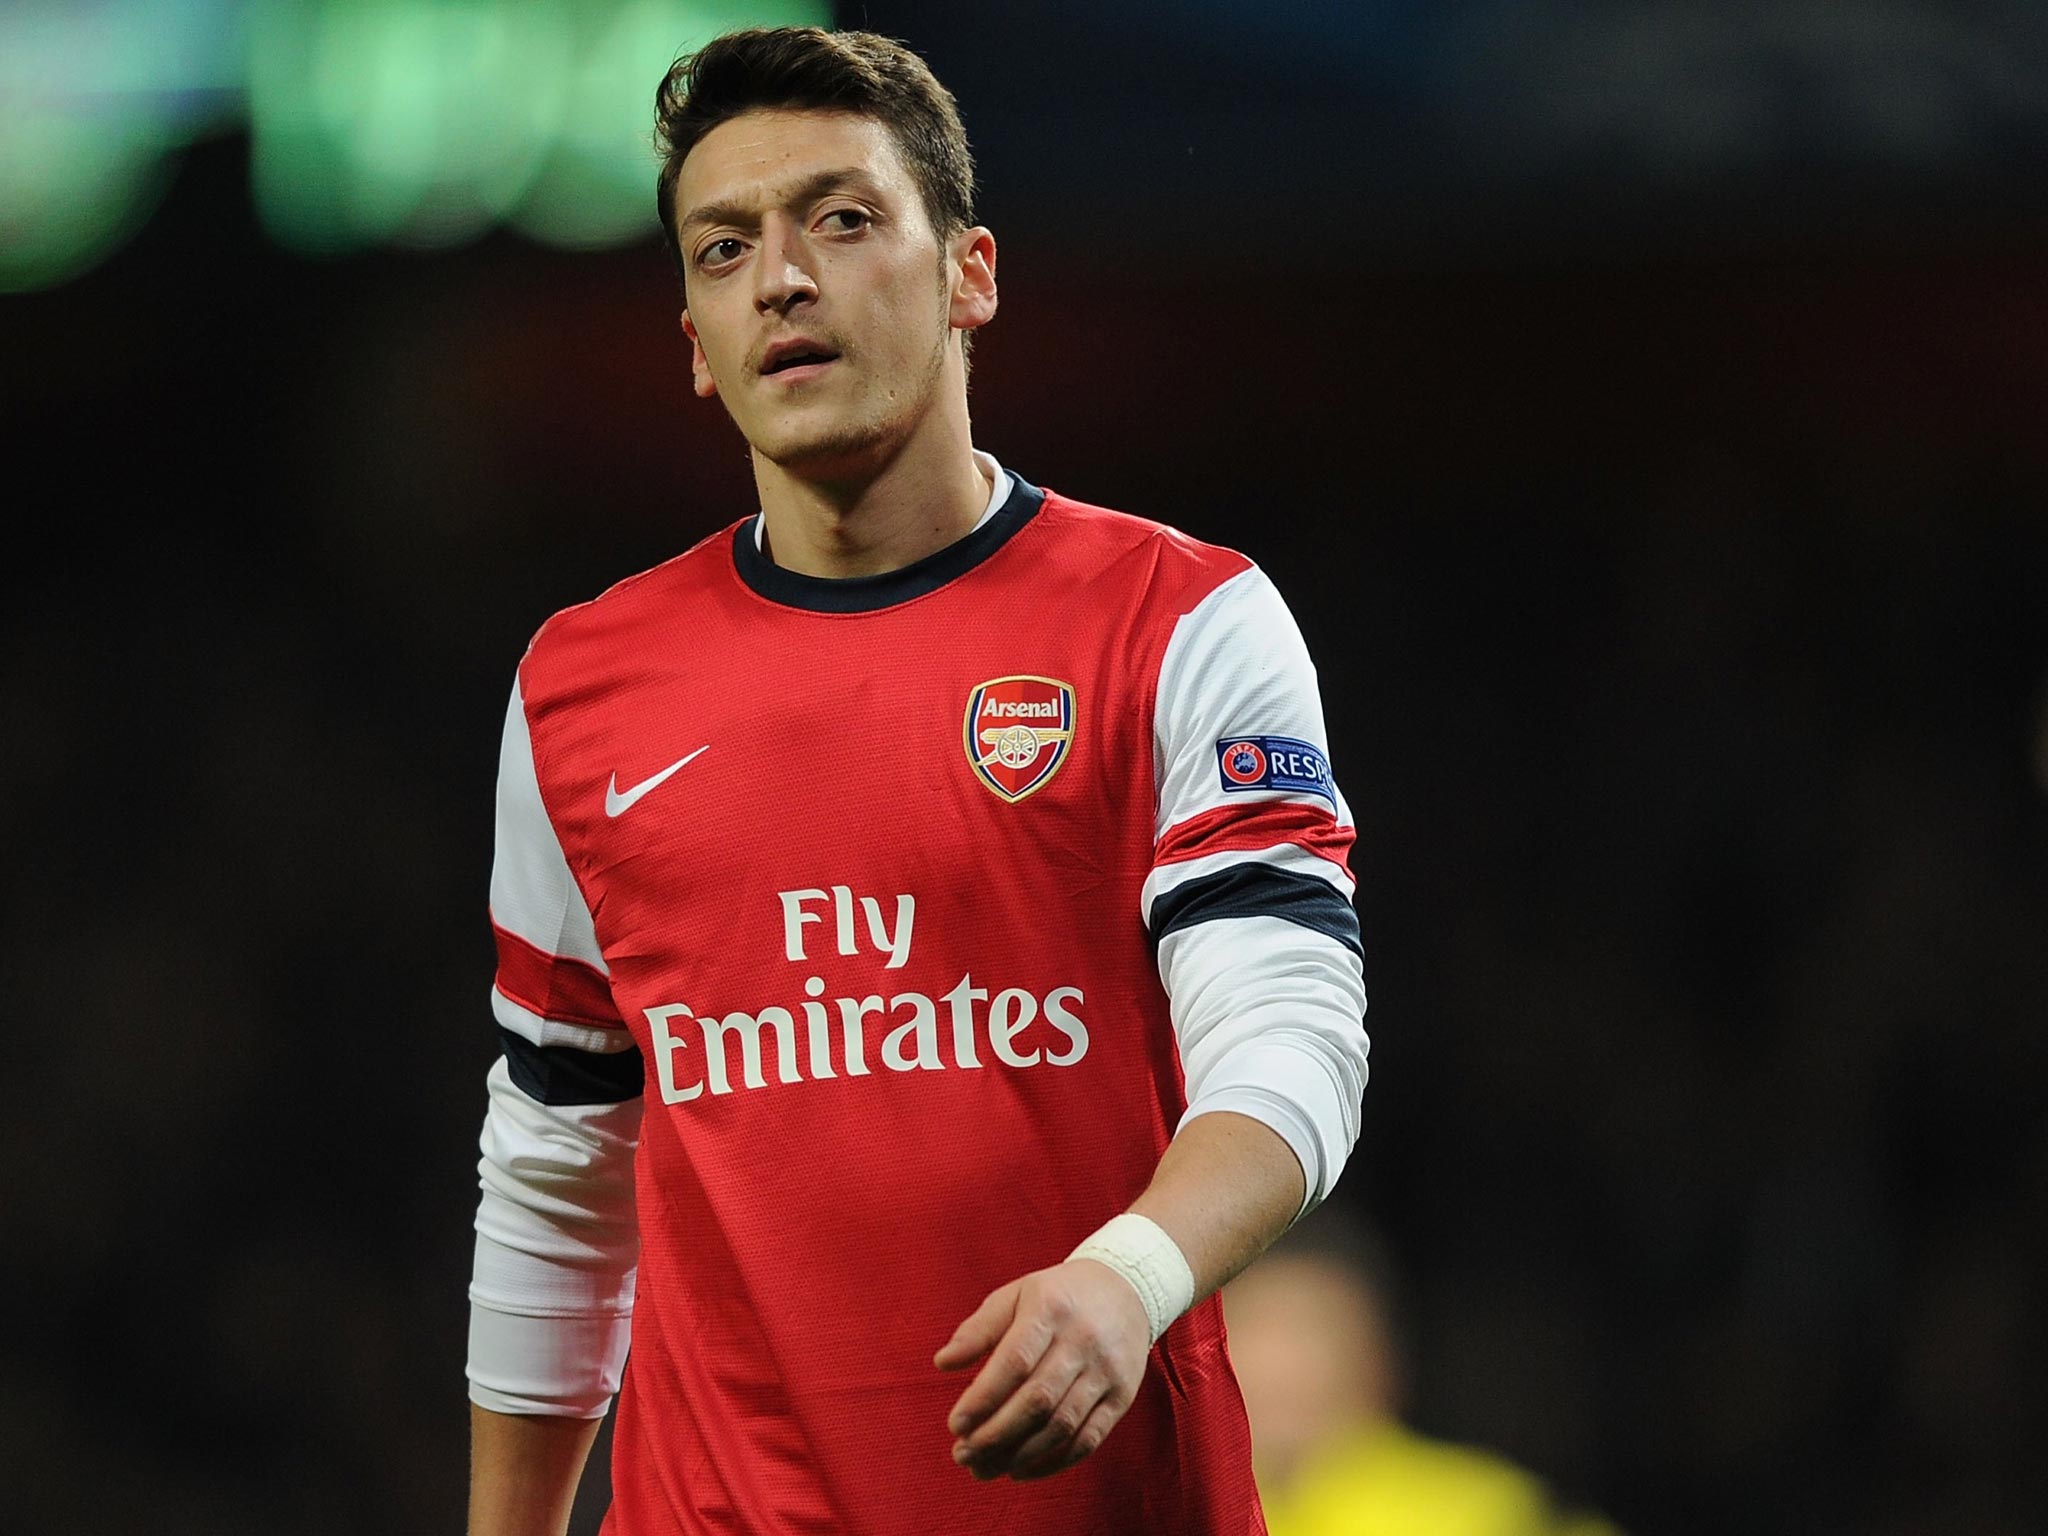 Mesut Özil’s lacklustre display showed the effects of a busy run of games since Christmas